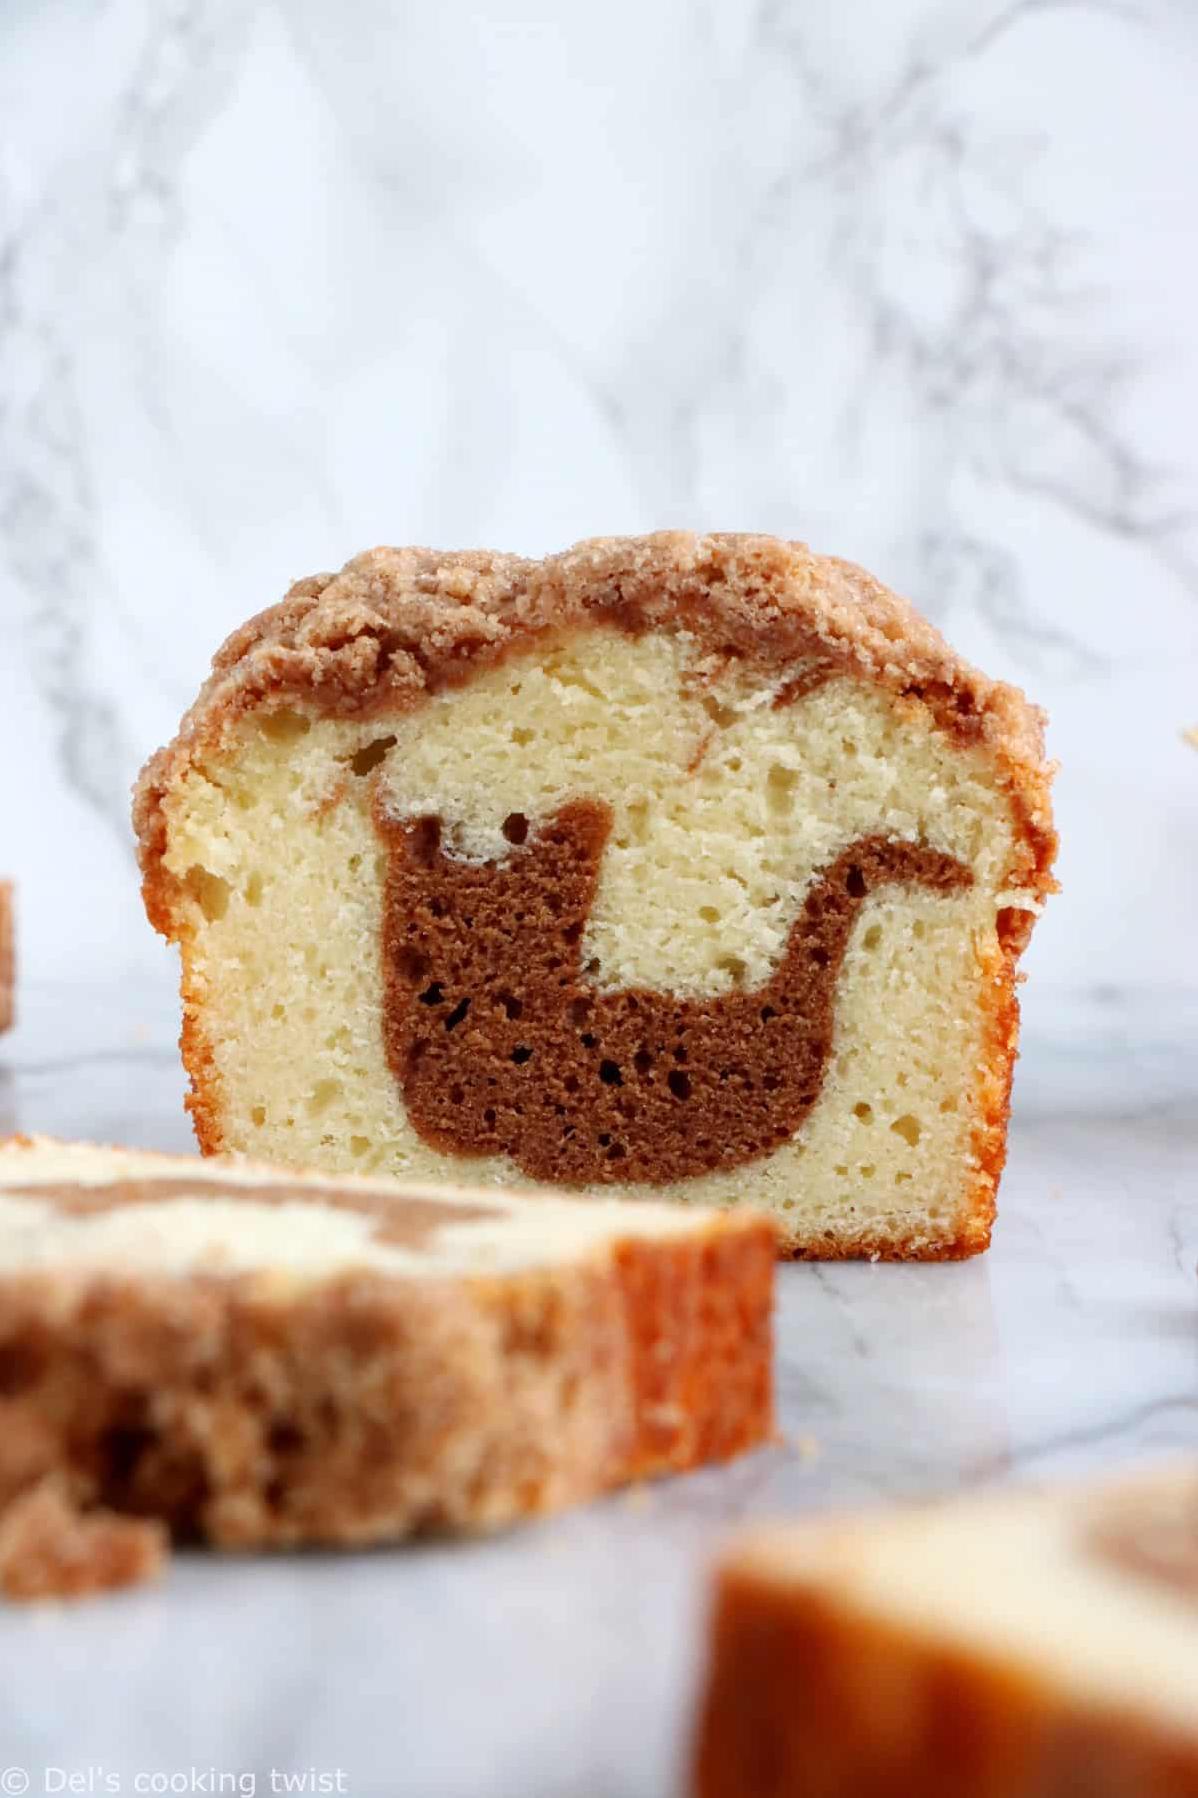  Enjoy a slice of this coffee cake for the ultimate breakfast experience.